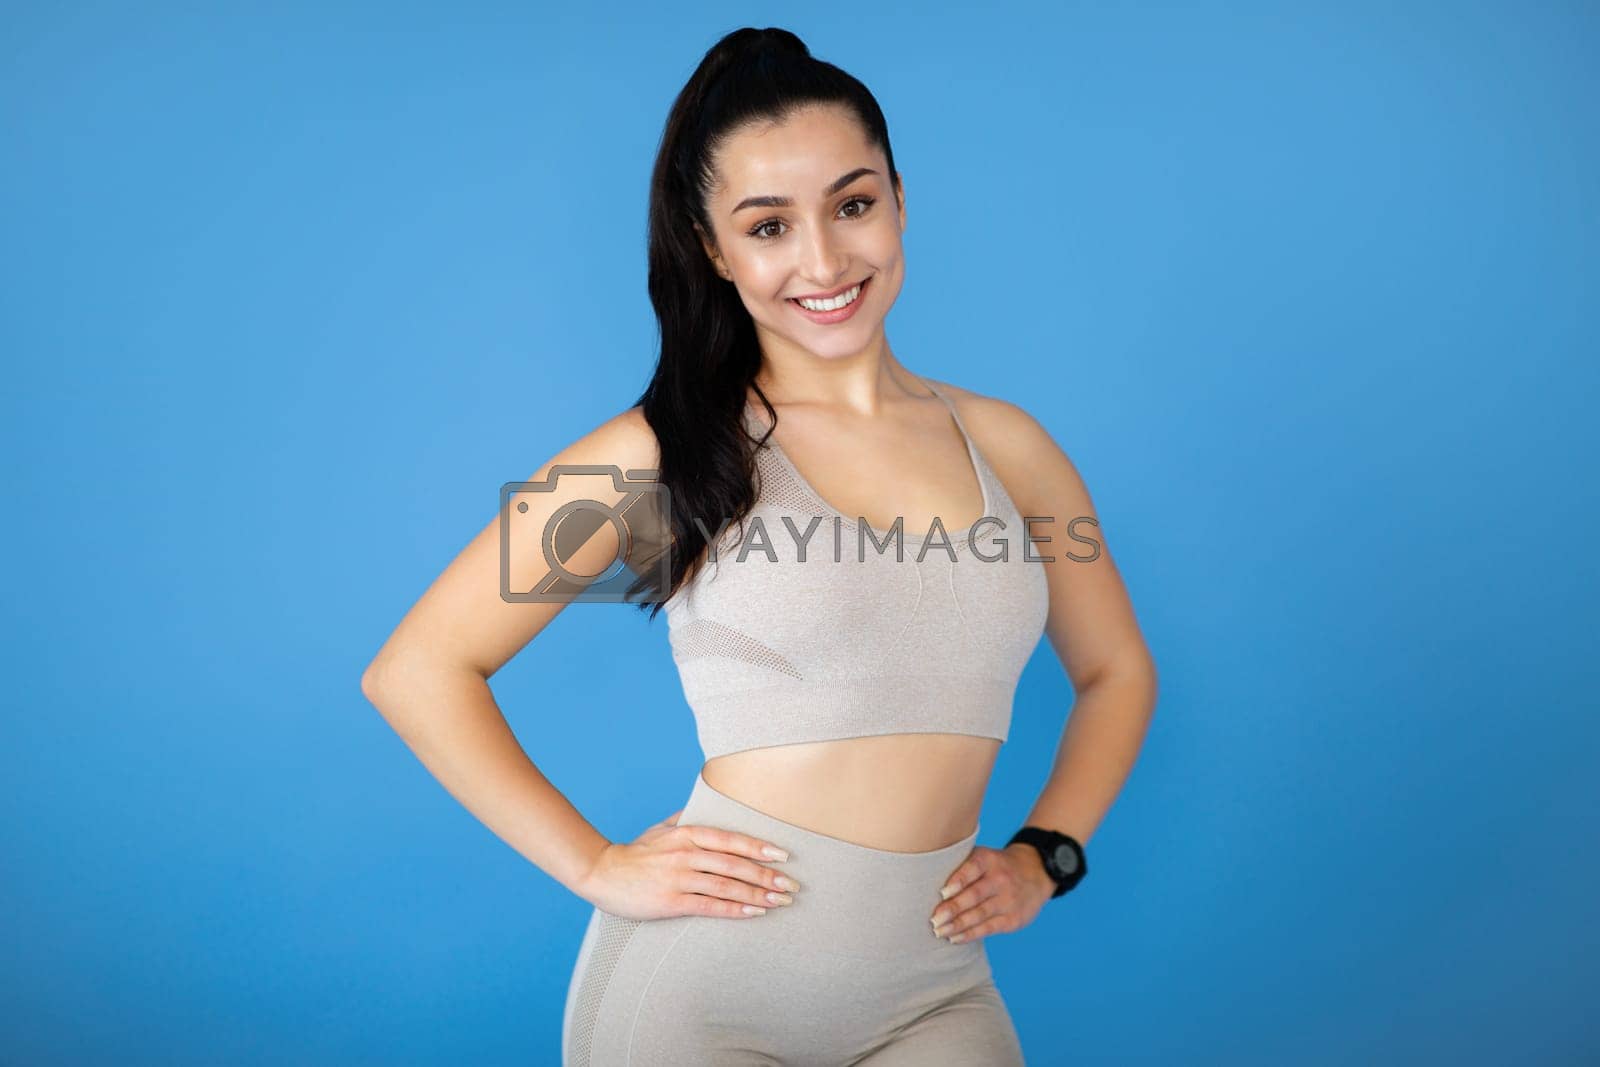 Royalty free image of Attractive young sporty lady posing on blue background by Prostock-studio